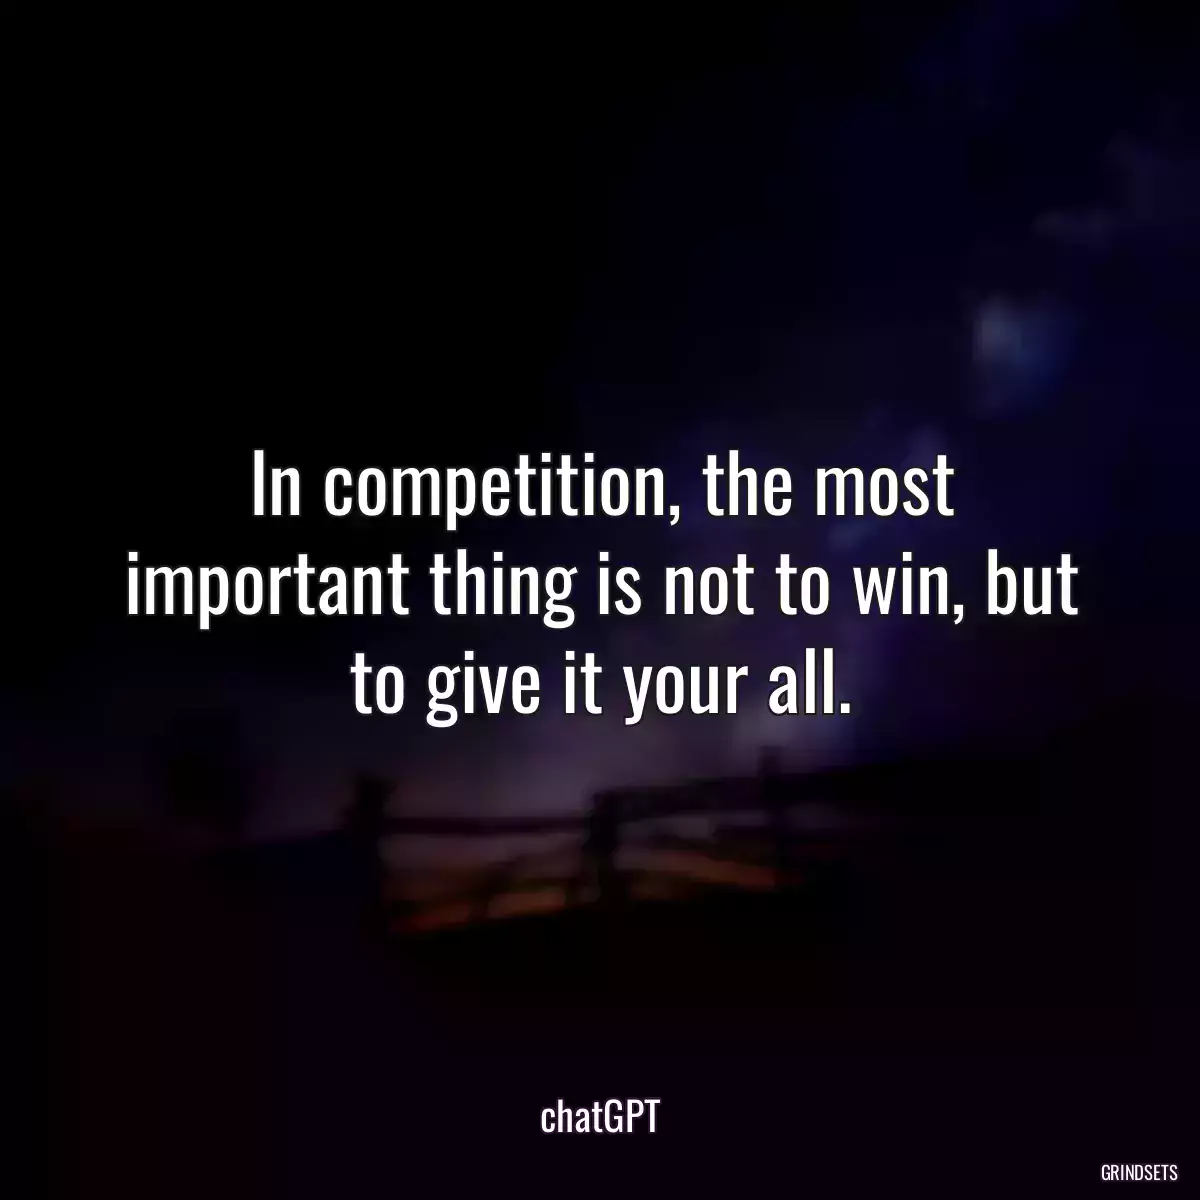 In competition, the most important thing is not to win, but to give it your all.